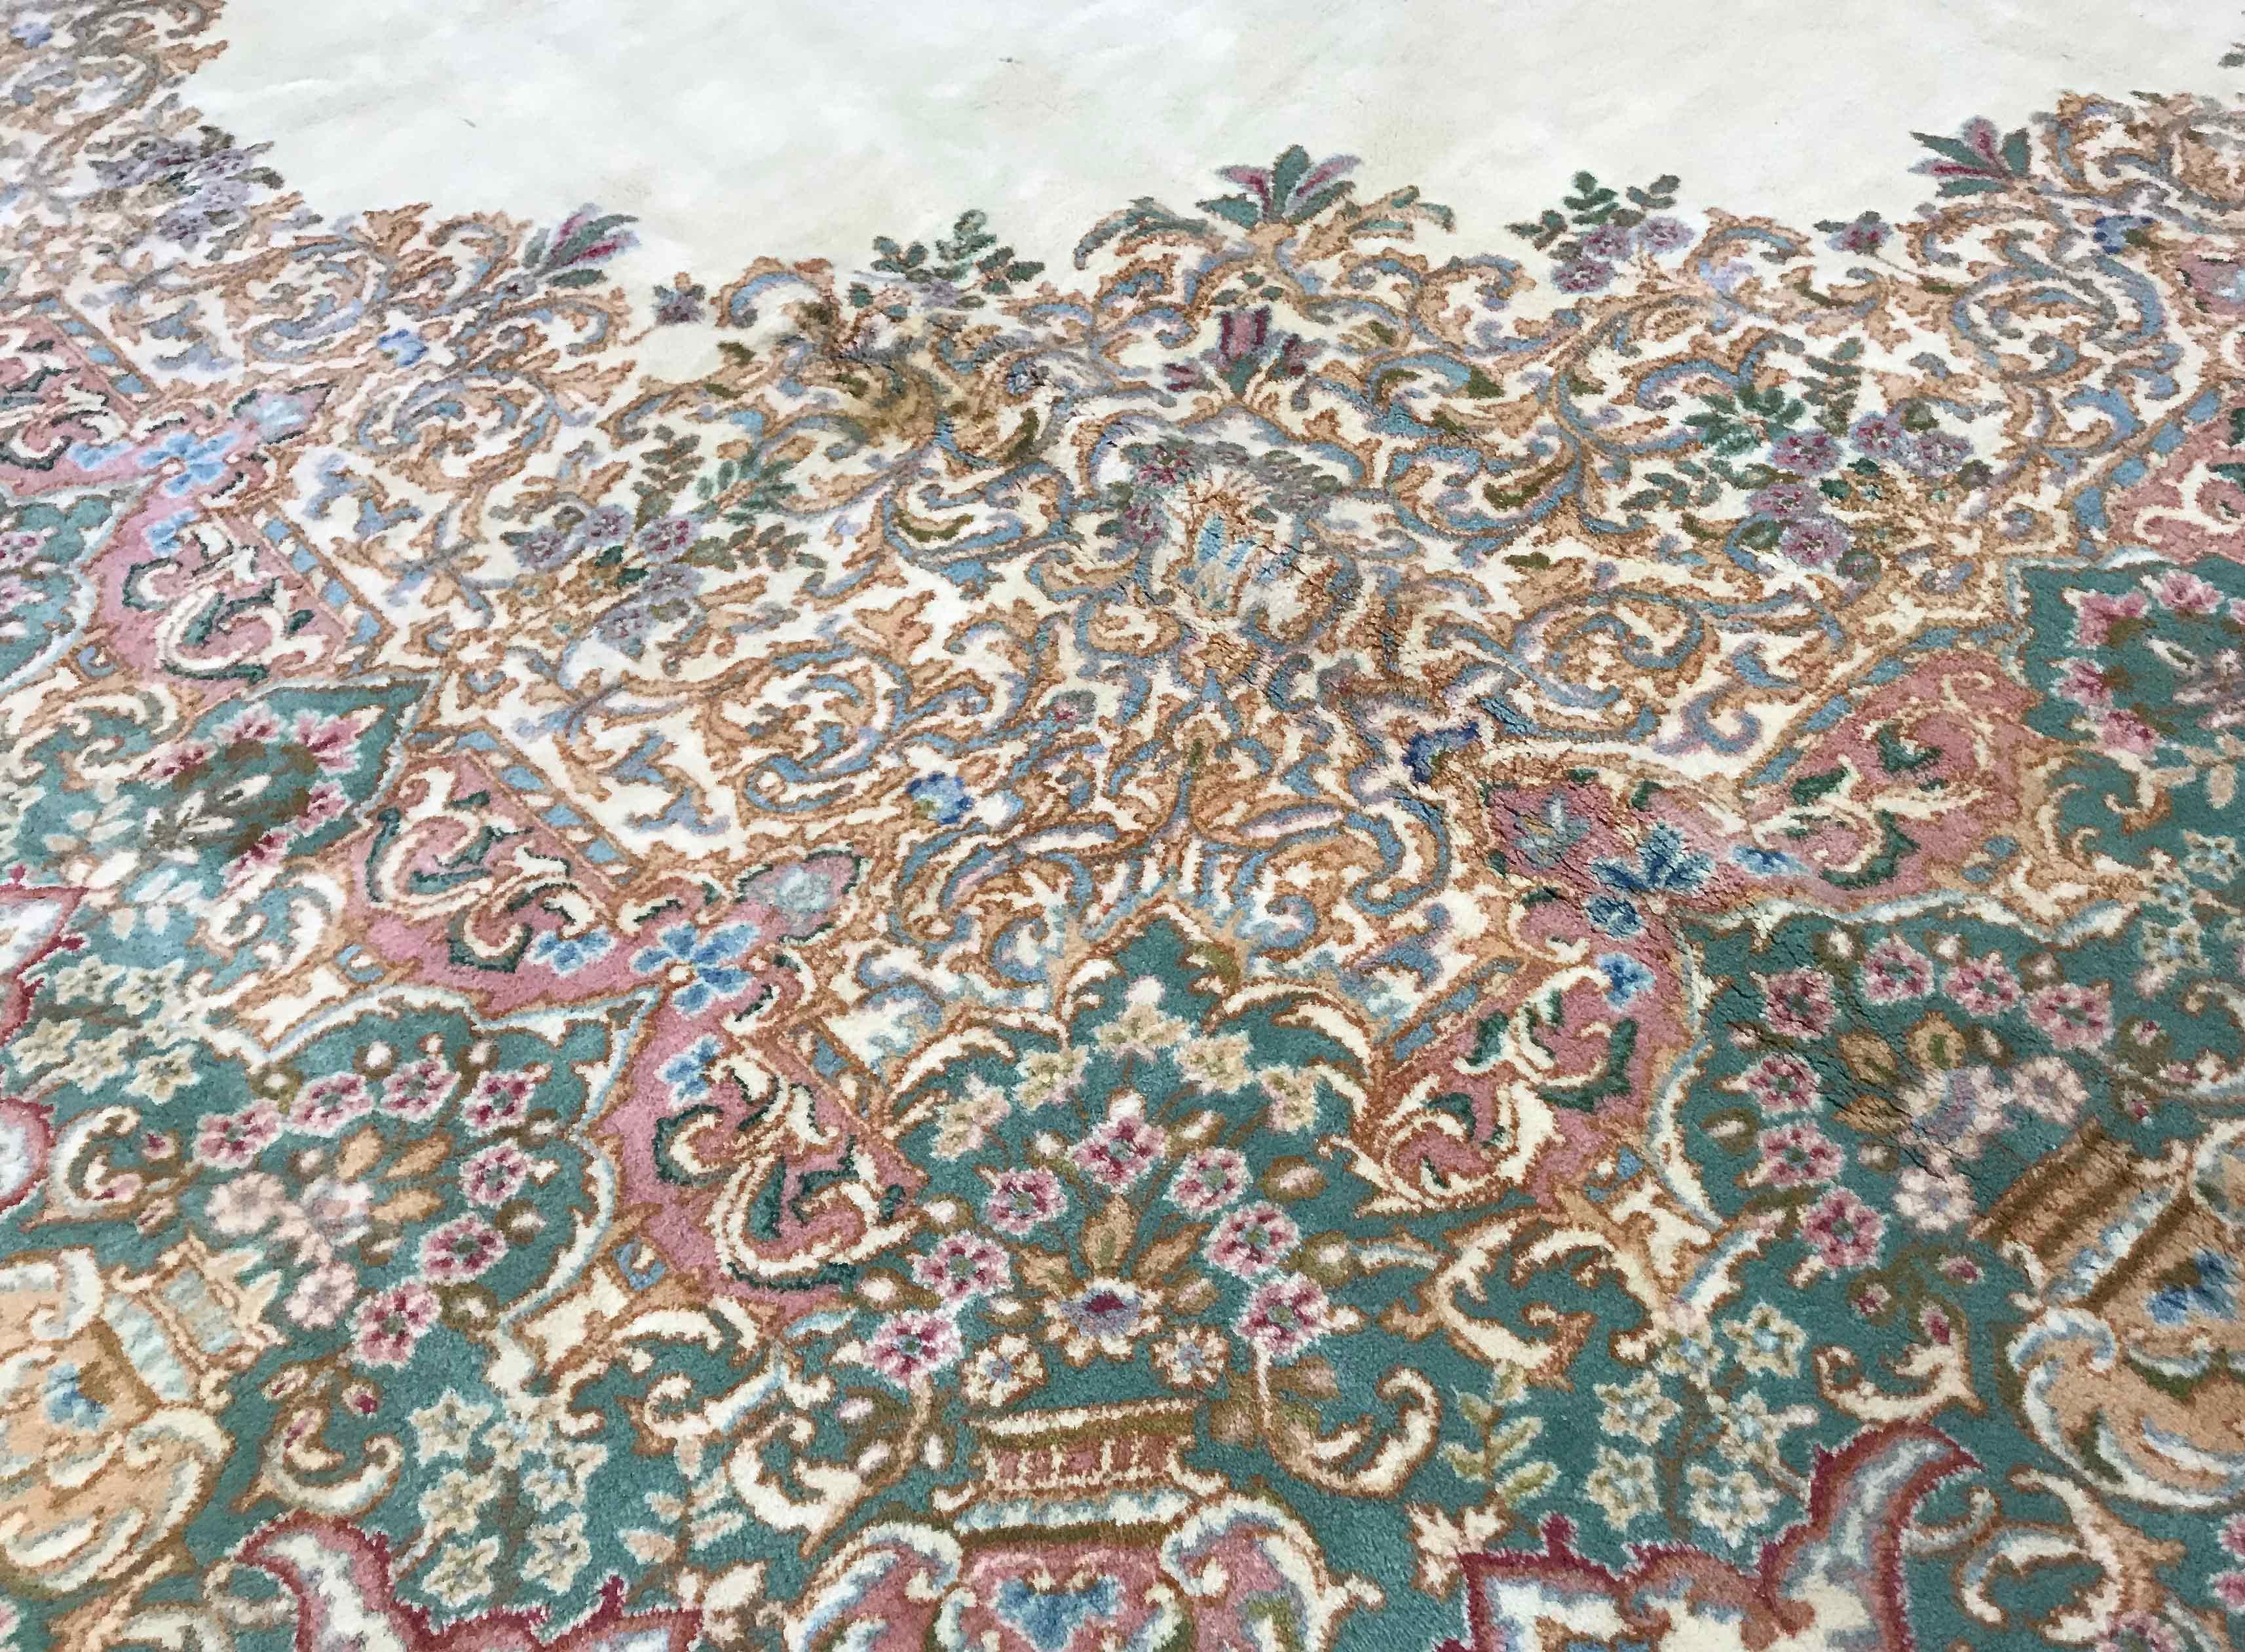 Vintage Persian Kerman rug, circa 1940. A classic look to this oversize Kerman rug with a soft ivory field incorporating a central design which is repeated around the sides and border in rich detail that shows up this rug as of the highest quality.